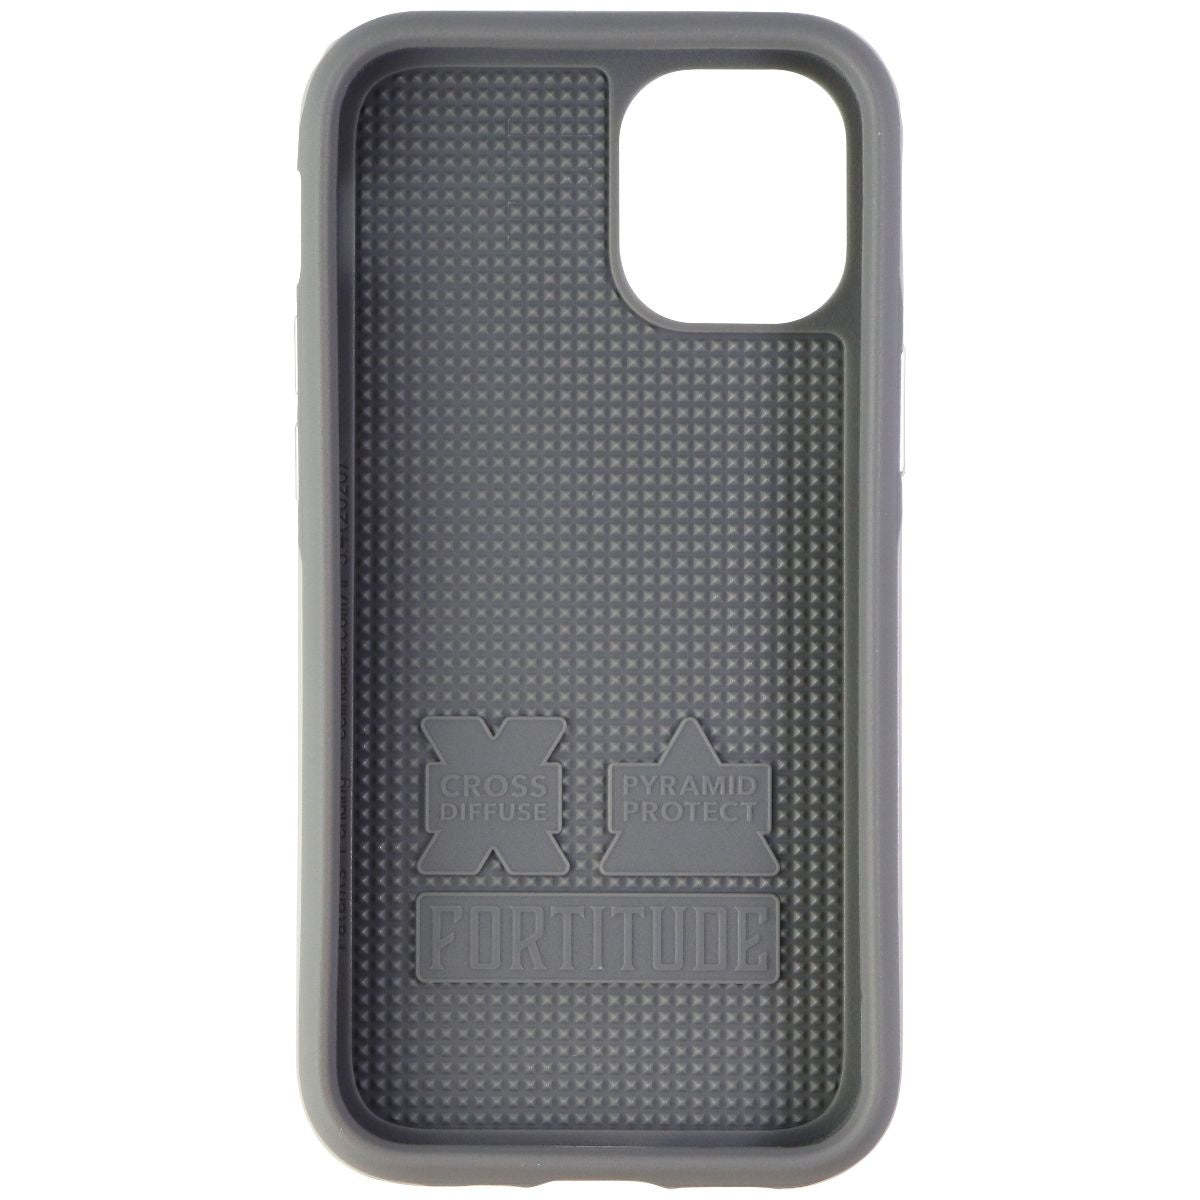 CellHelmet Fortitude Series Case for Apple iPhone 12 Mini - Gray Cell Phone - Cases, Covers & Skins CellHelmet    - Simple Cell Bulk Wholesale Pricing - USA Seller